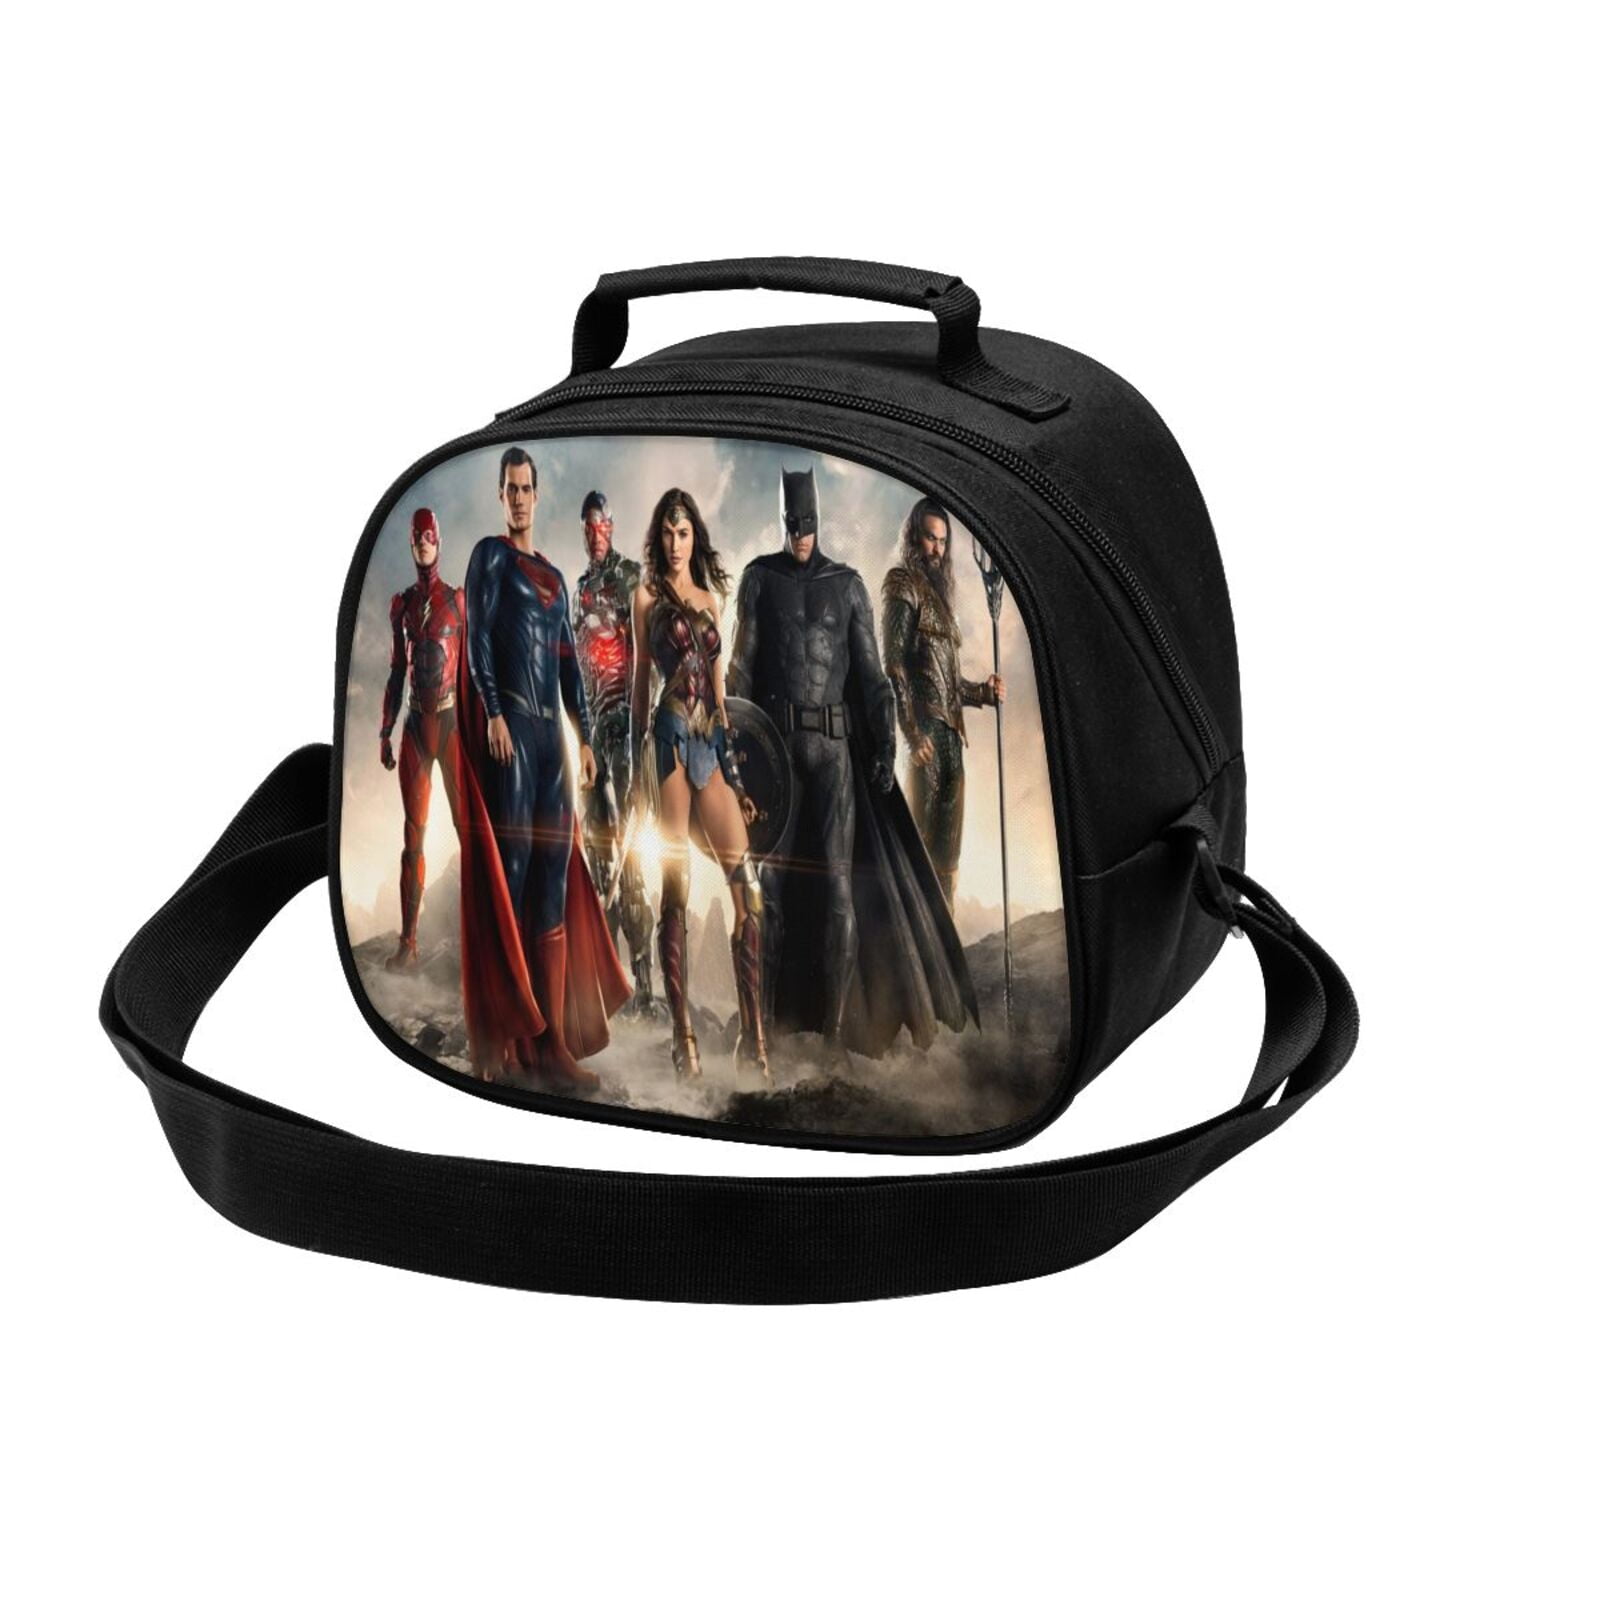 JUSTICE LEAGUE Insulated Cooler Snack Lunch Bag Kids Boys School Food Picnic Box 